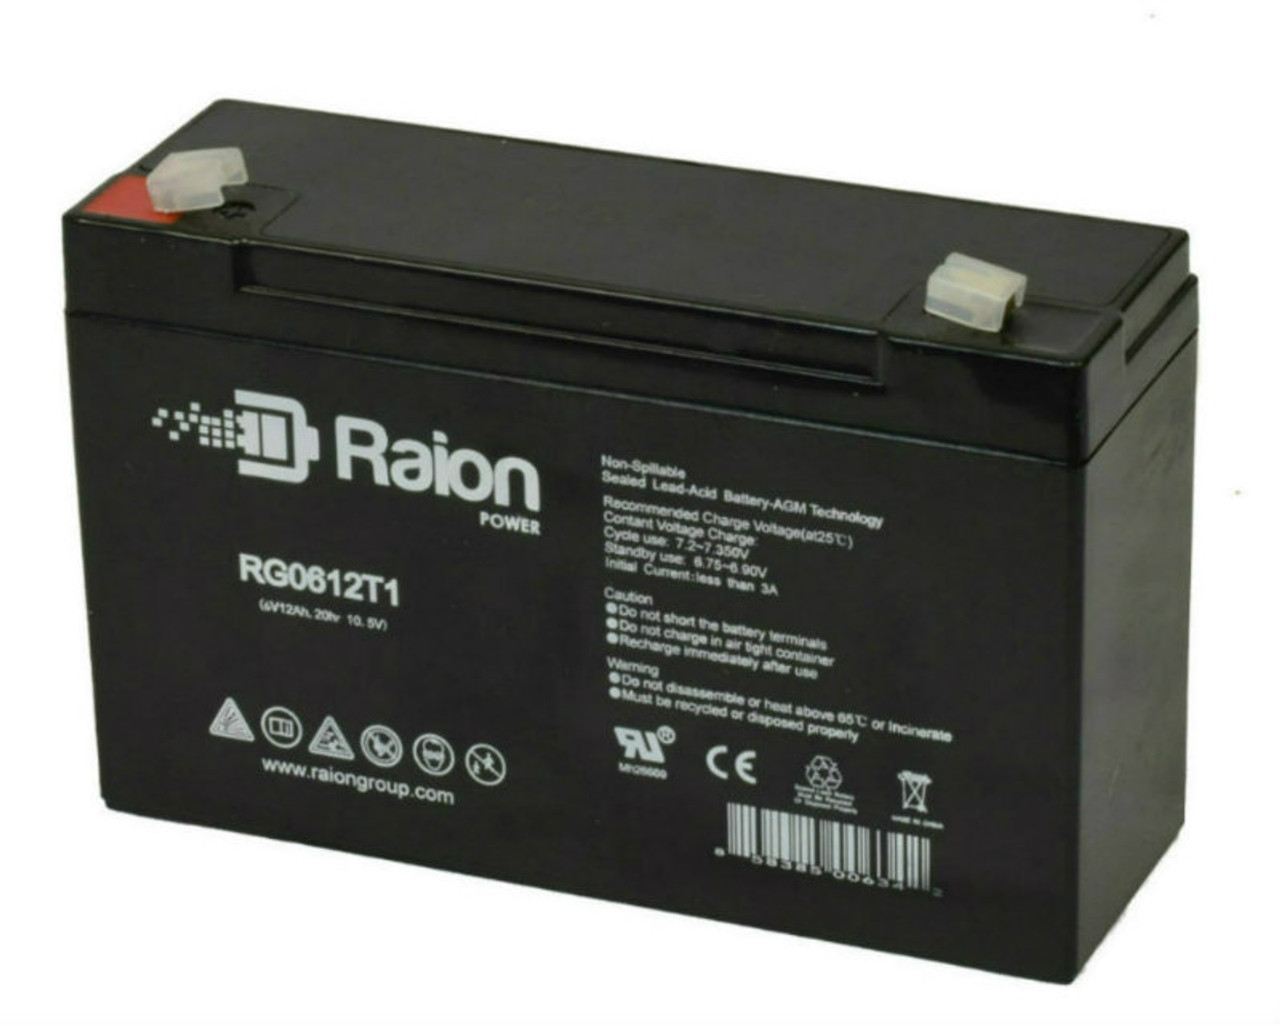 Raion Power RG06120T1 Replacement 6V 12Ah Emergency Light Battery for Light Alarms G1